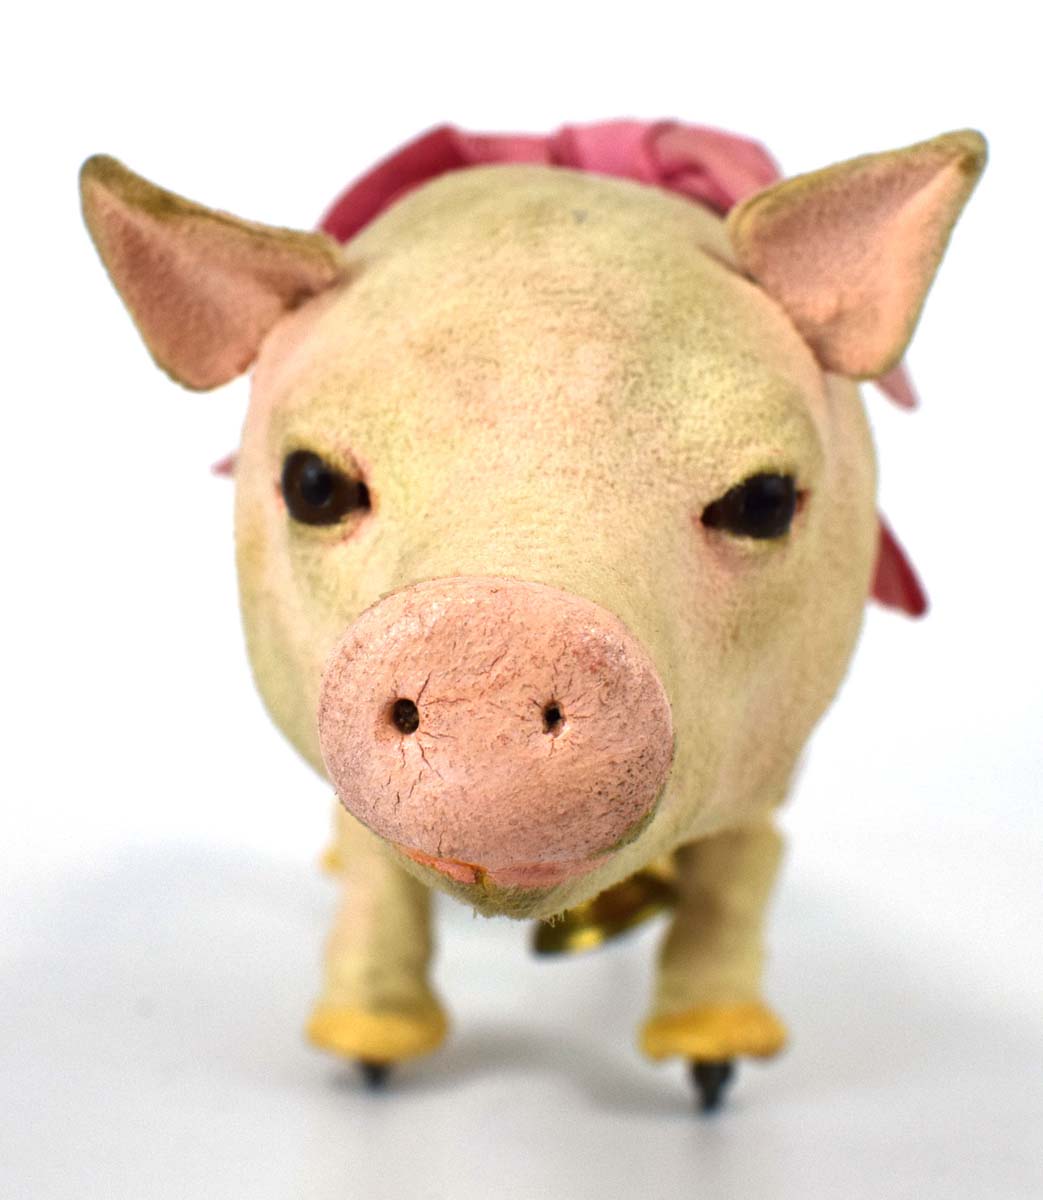 A circa 1905 French automaton modelled as a walking and grunting pig by Roullet et Decamps, - Image 4 of 17